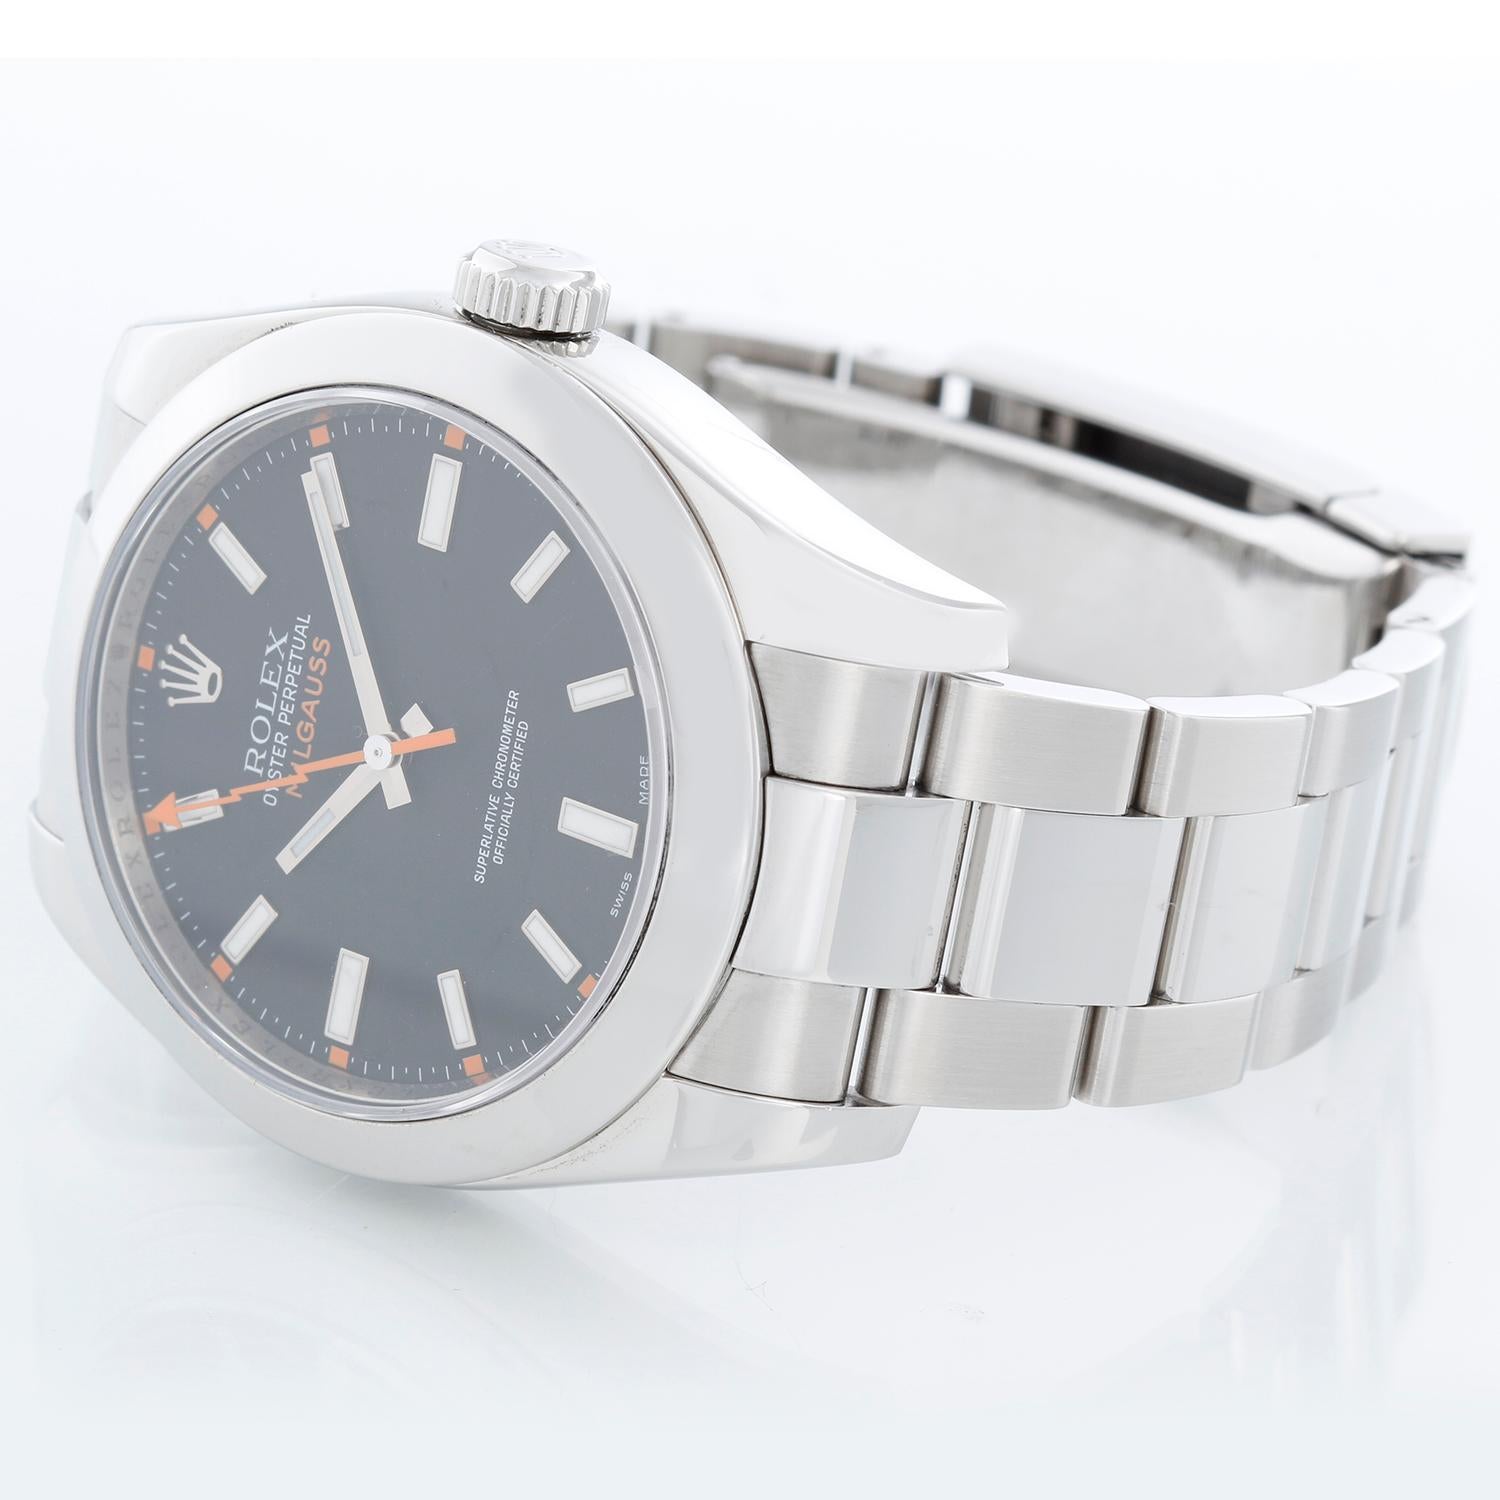 Rolex Milgauss Stainless Steel Men's Watch Black Dial 116400 - Automatic winding, sapphire crystal, 31 jewels. Stainless steel case with smooth bezel (40mm diameter). Black dial with luminous-style orange markers. Stainless steel Oyster bracelet